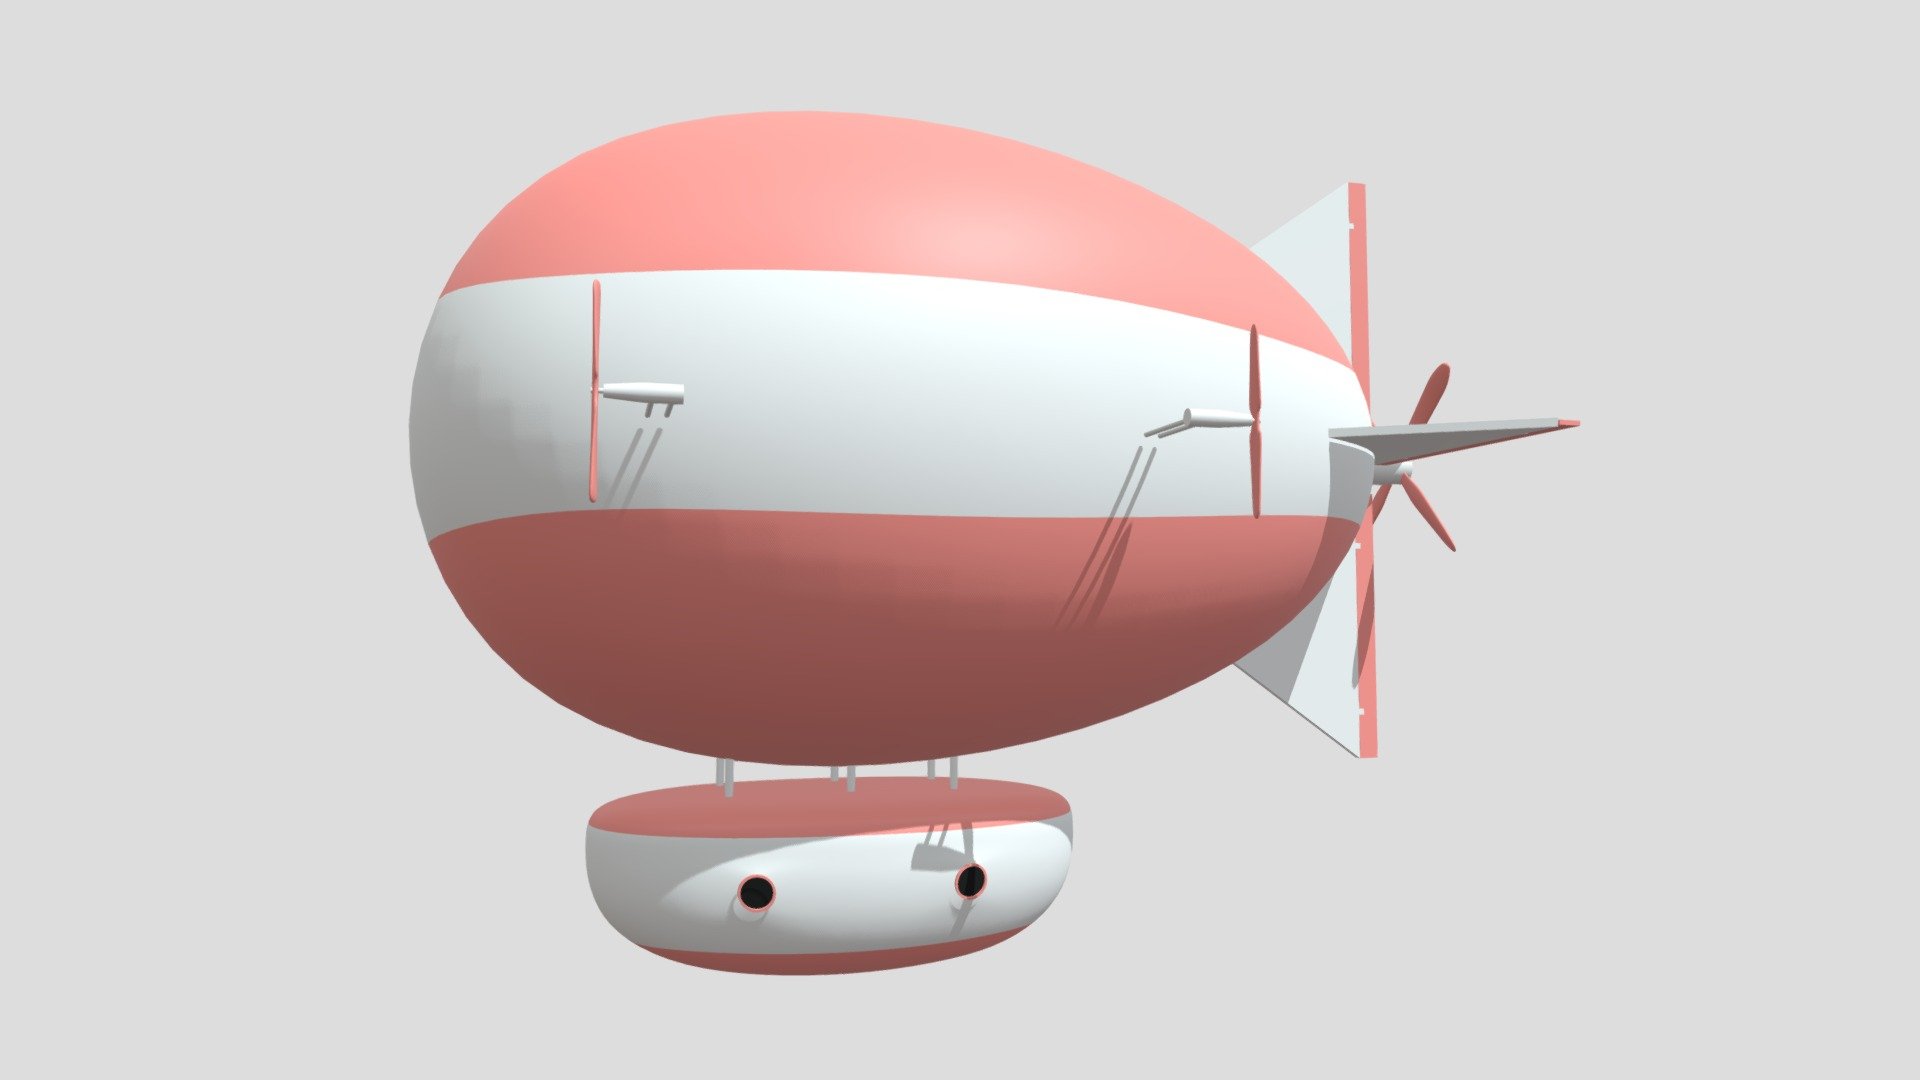 Cartoon Airship.

Made with Blender 2.8.

Rendered with Cycles.

system units -: m.

Included 18 objects.

Polygons: 24,956.

Vertices: 25,404.

Formats: . blend . fbx . obj, c4d,dae,fbx,unity.

Thank you 3d model